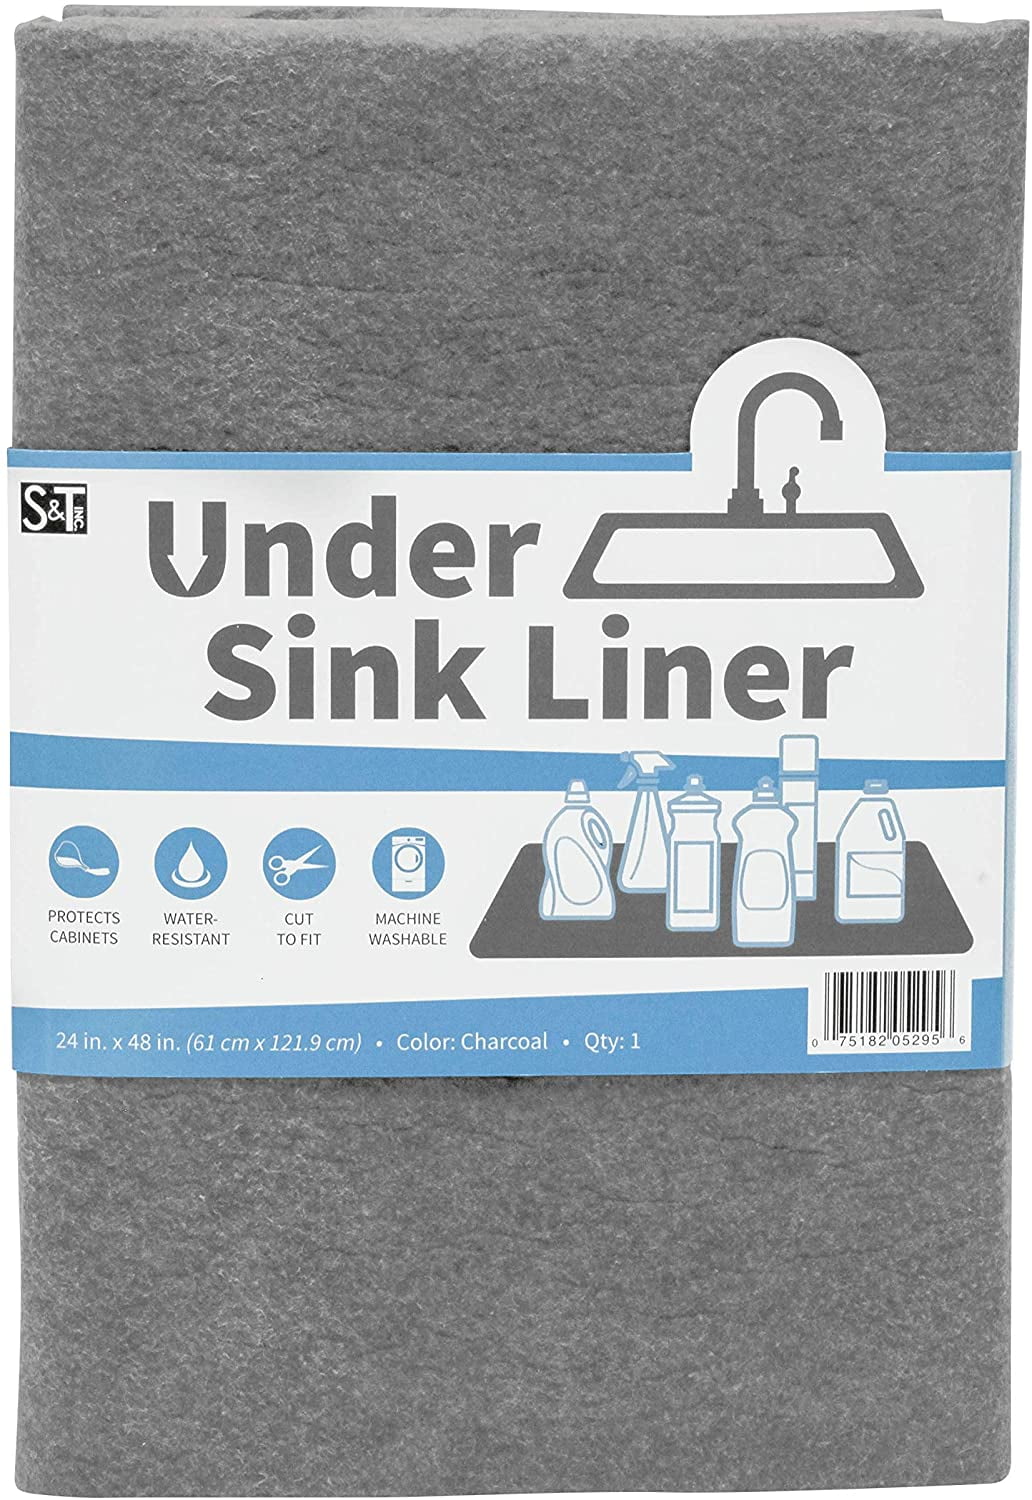 AiBOB Waterproof Under Sink Mat, Absorbent Quick Dry Sink Liners Protect  Cabinets, Durable Shelf Liners, Slip Resistant and Non-Adhesive, 24X36,  Black